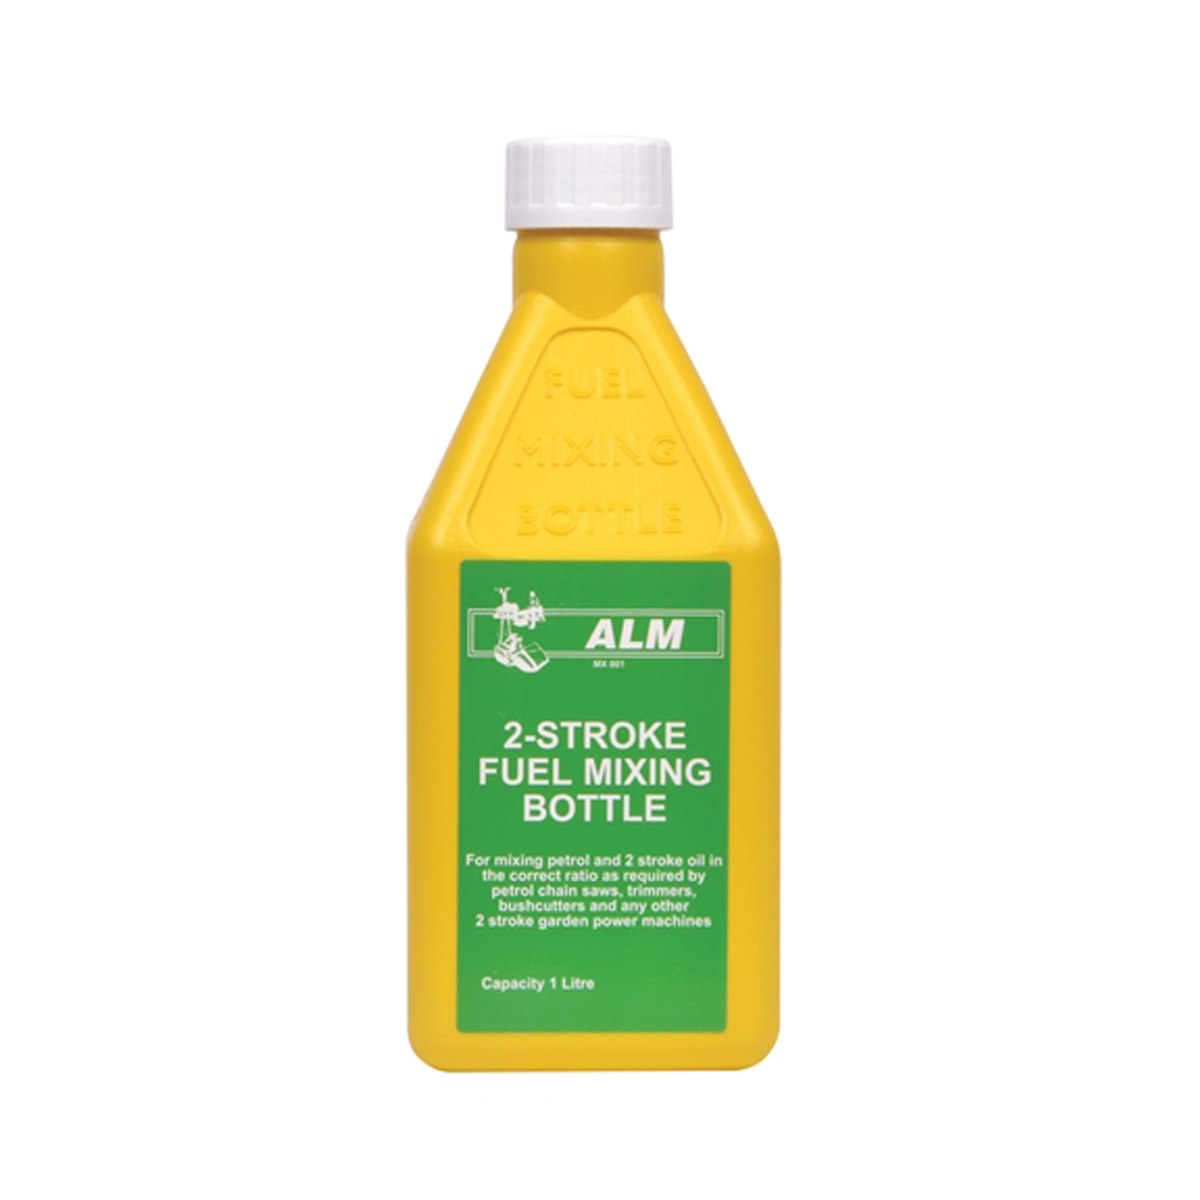 ALM Two Stroke Mixing Bottle 1 Litre Capacity